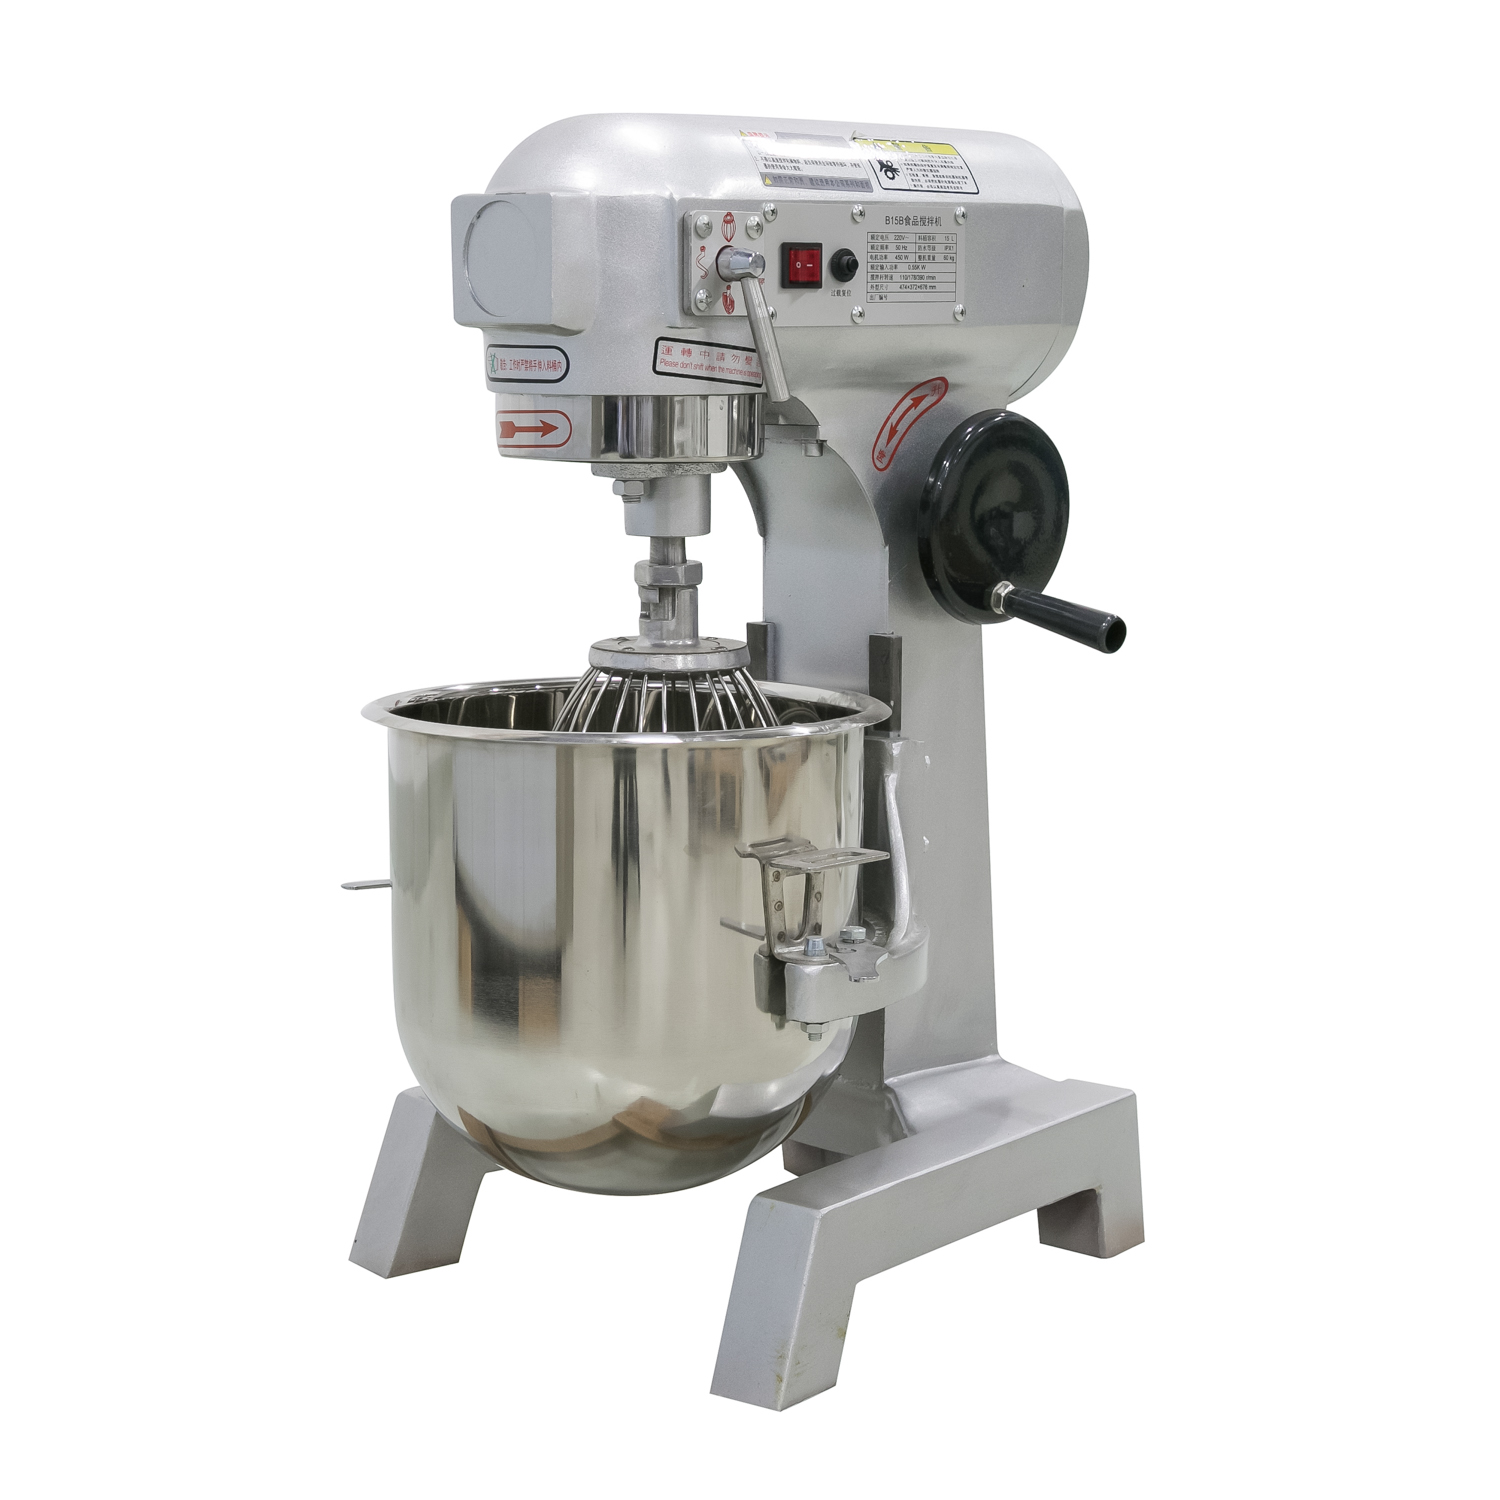 20L 30L 40L Planetary mixer dough mixer for cake cookies biscuit មកពីប្រទេសចិន